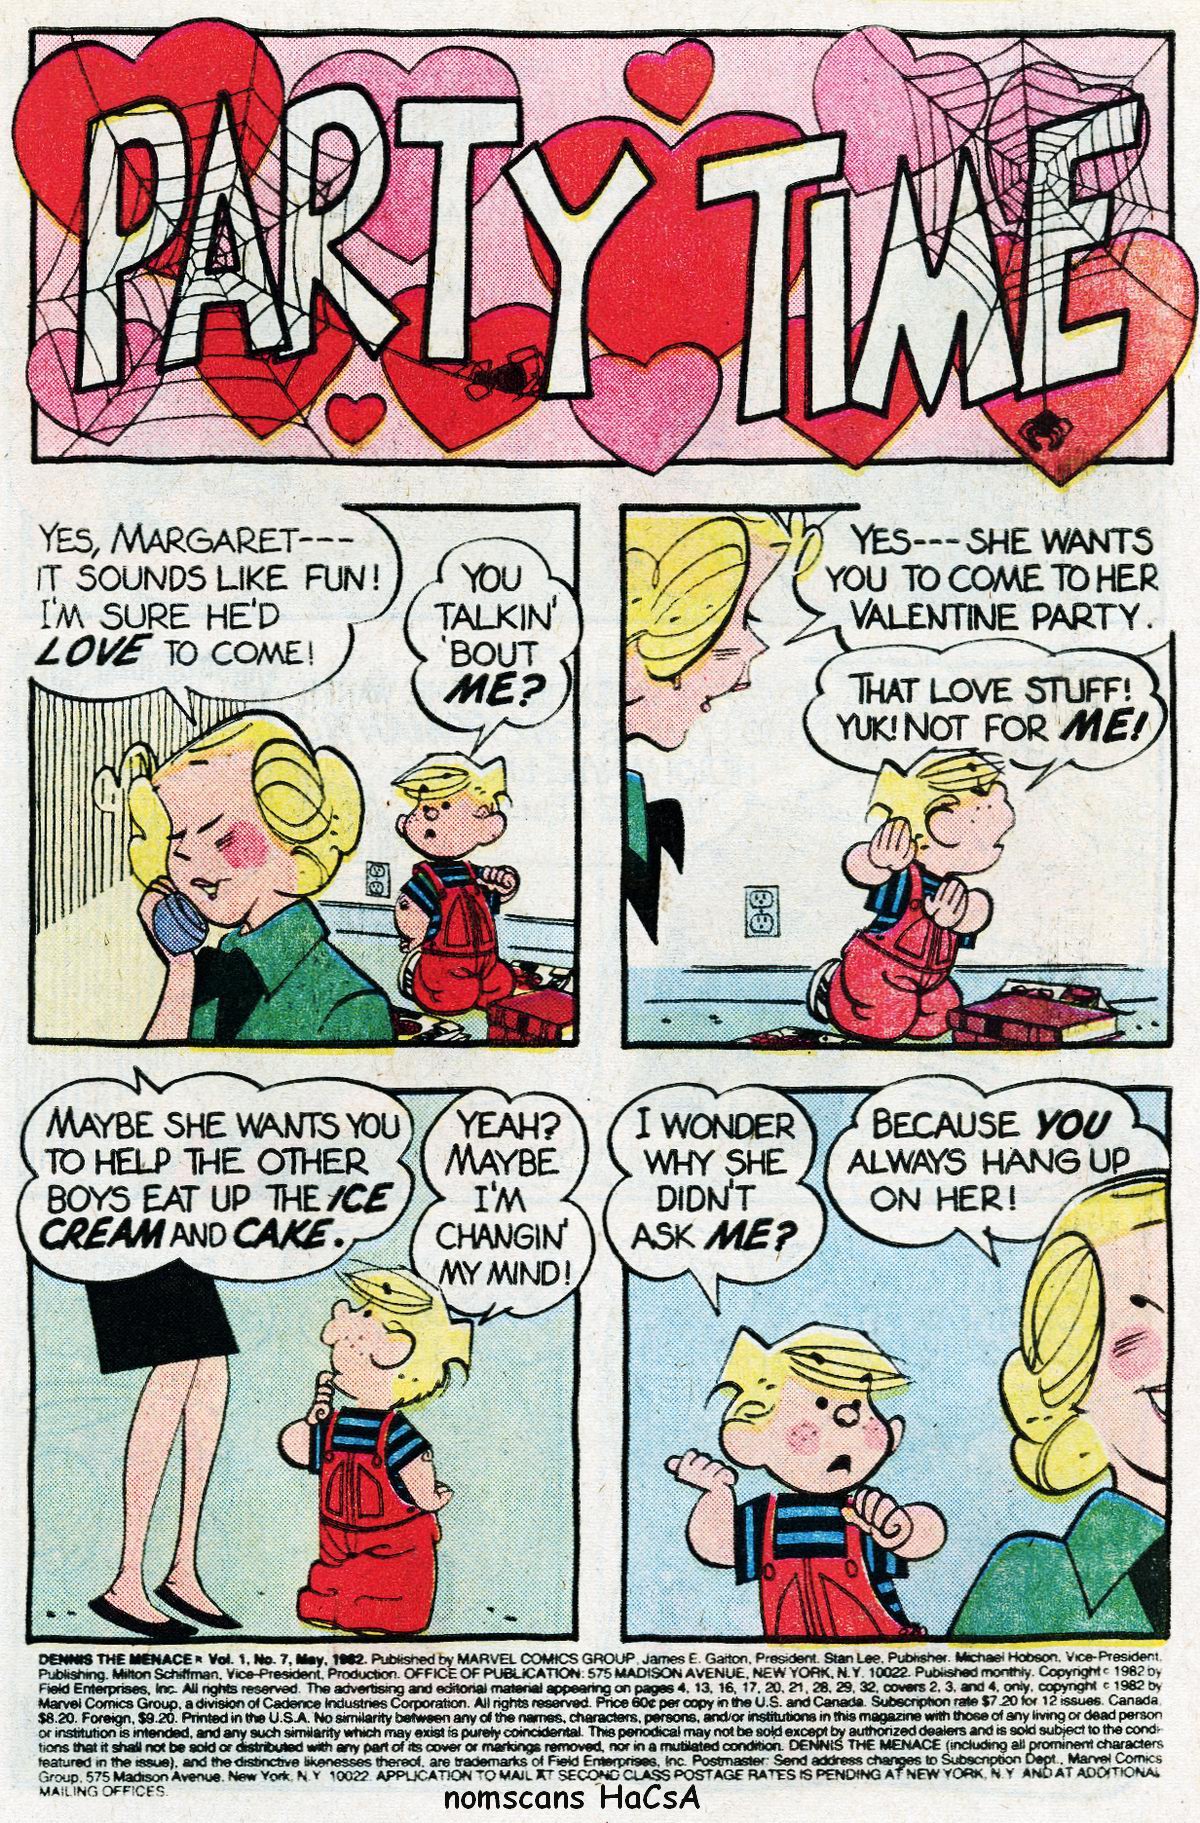 Dennis The Menace Issue Read Dennis The Menace Issue Comic Online